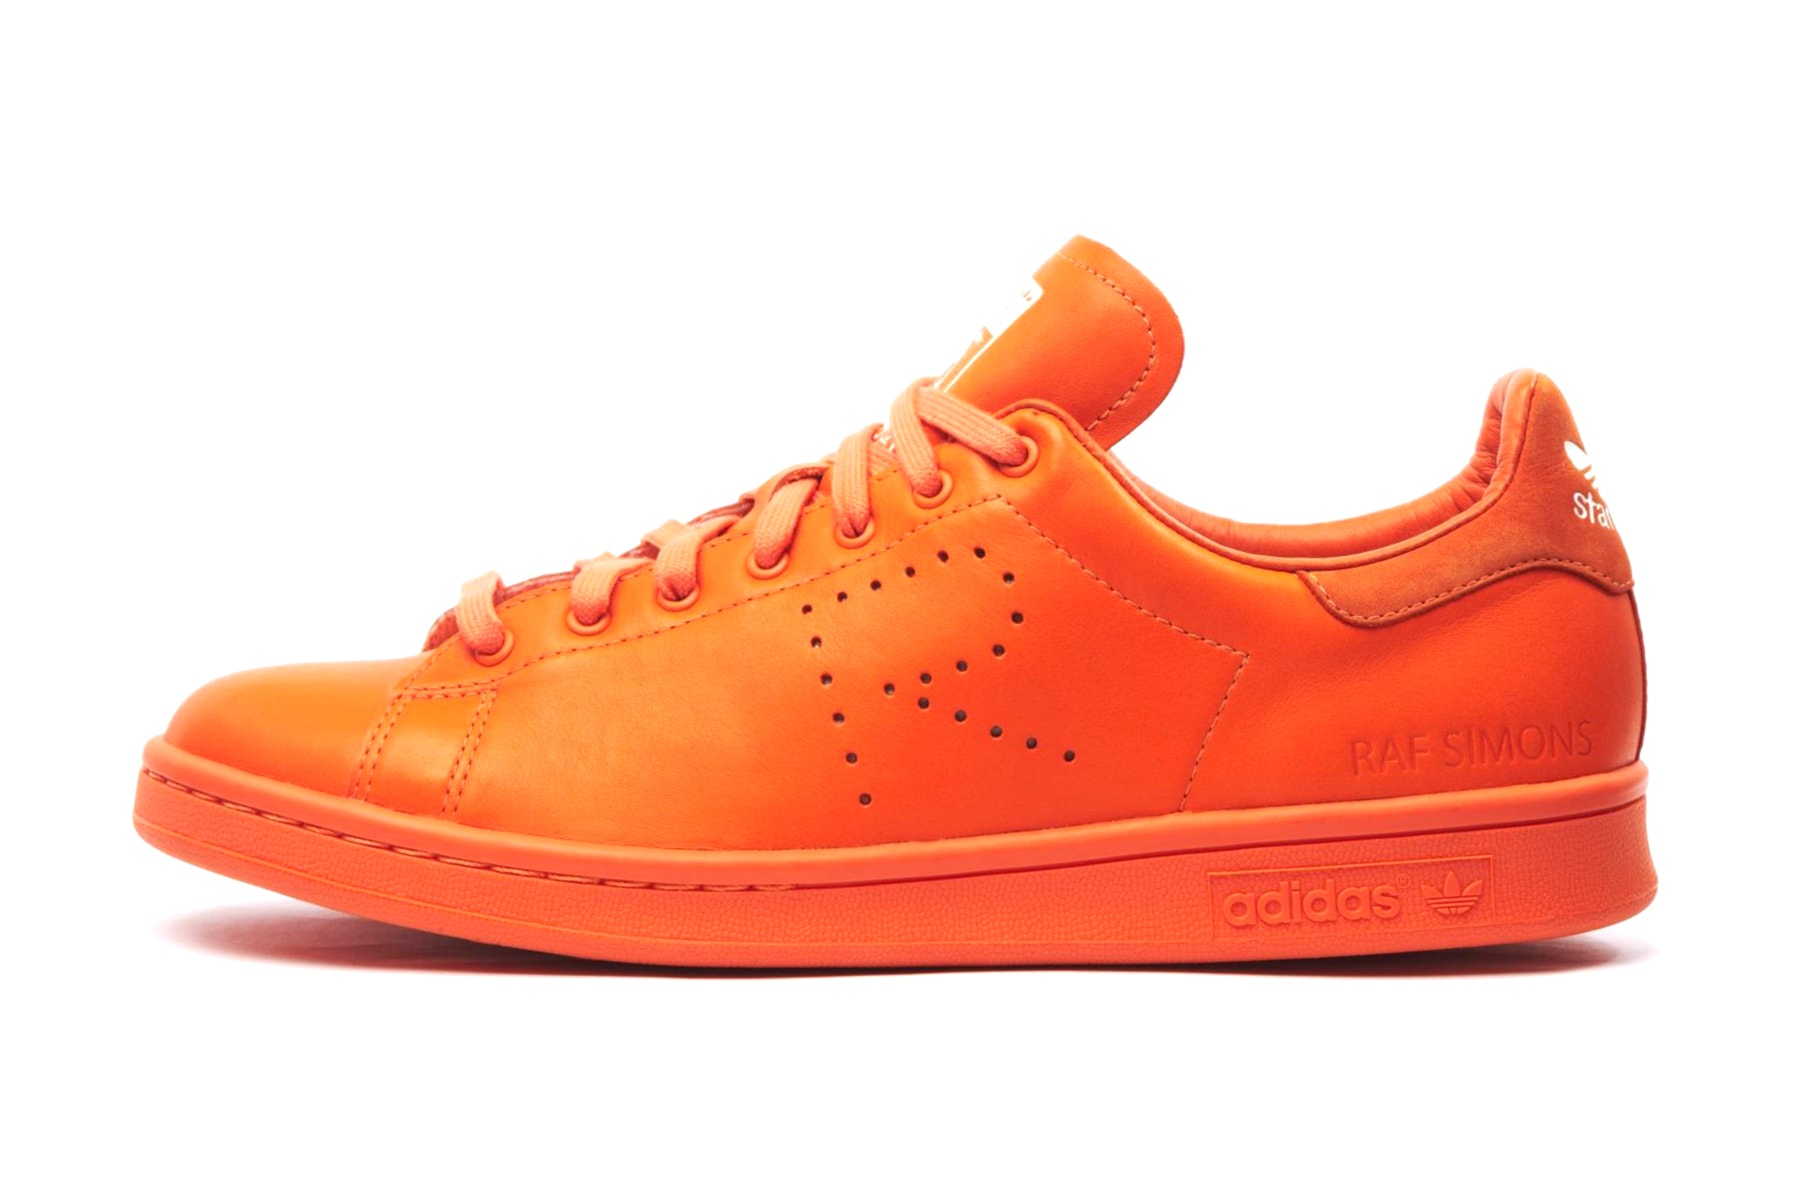 Raf Simons for adidas 2014 Fall/Winter Collection | Hypebeast